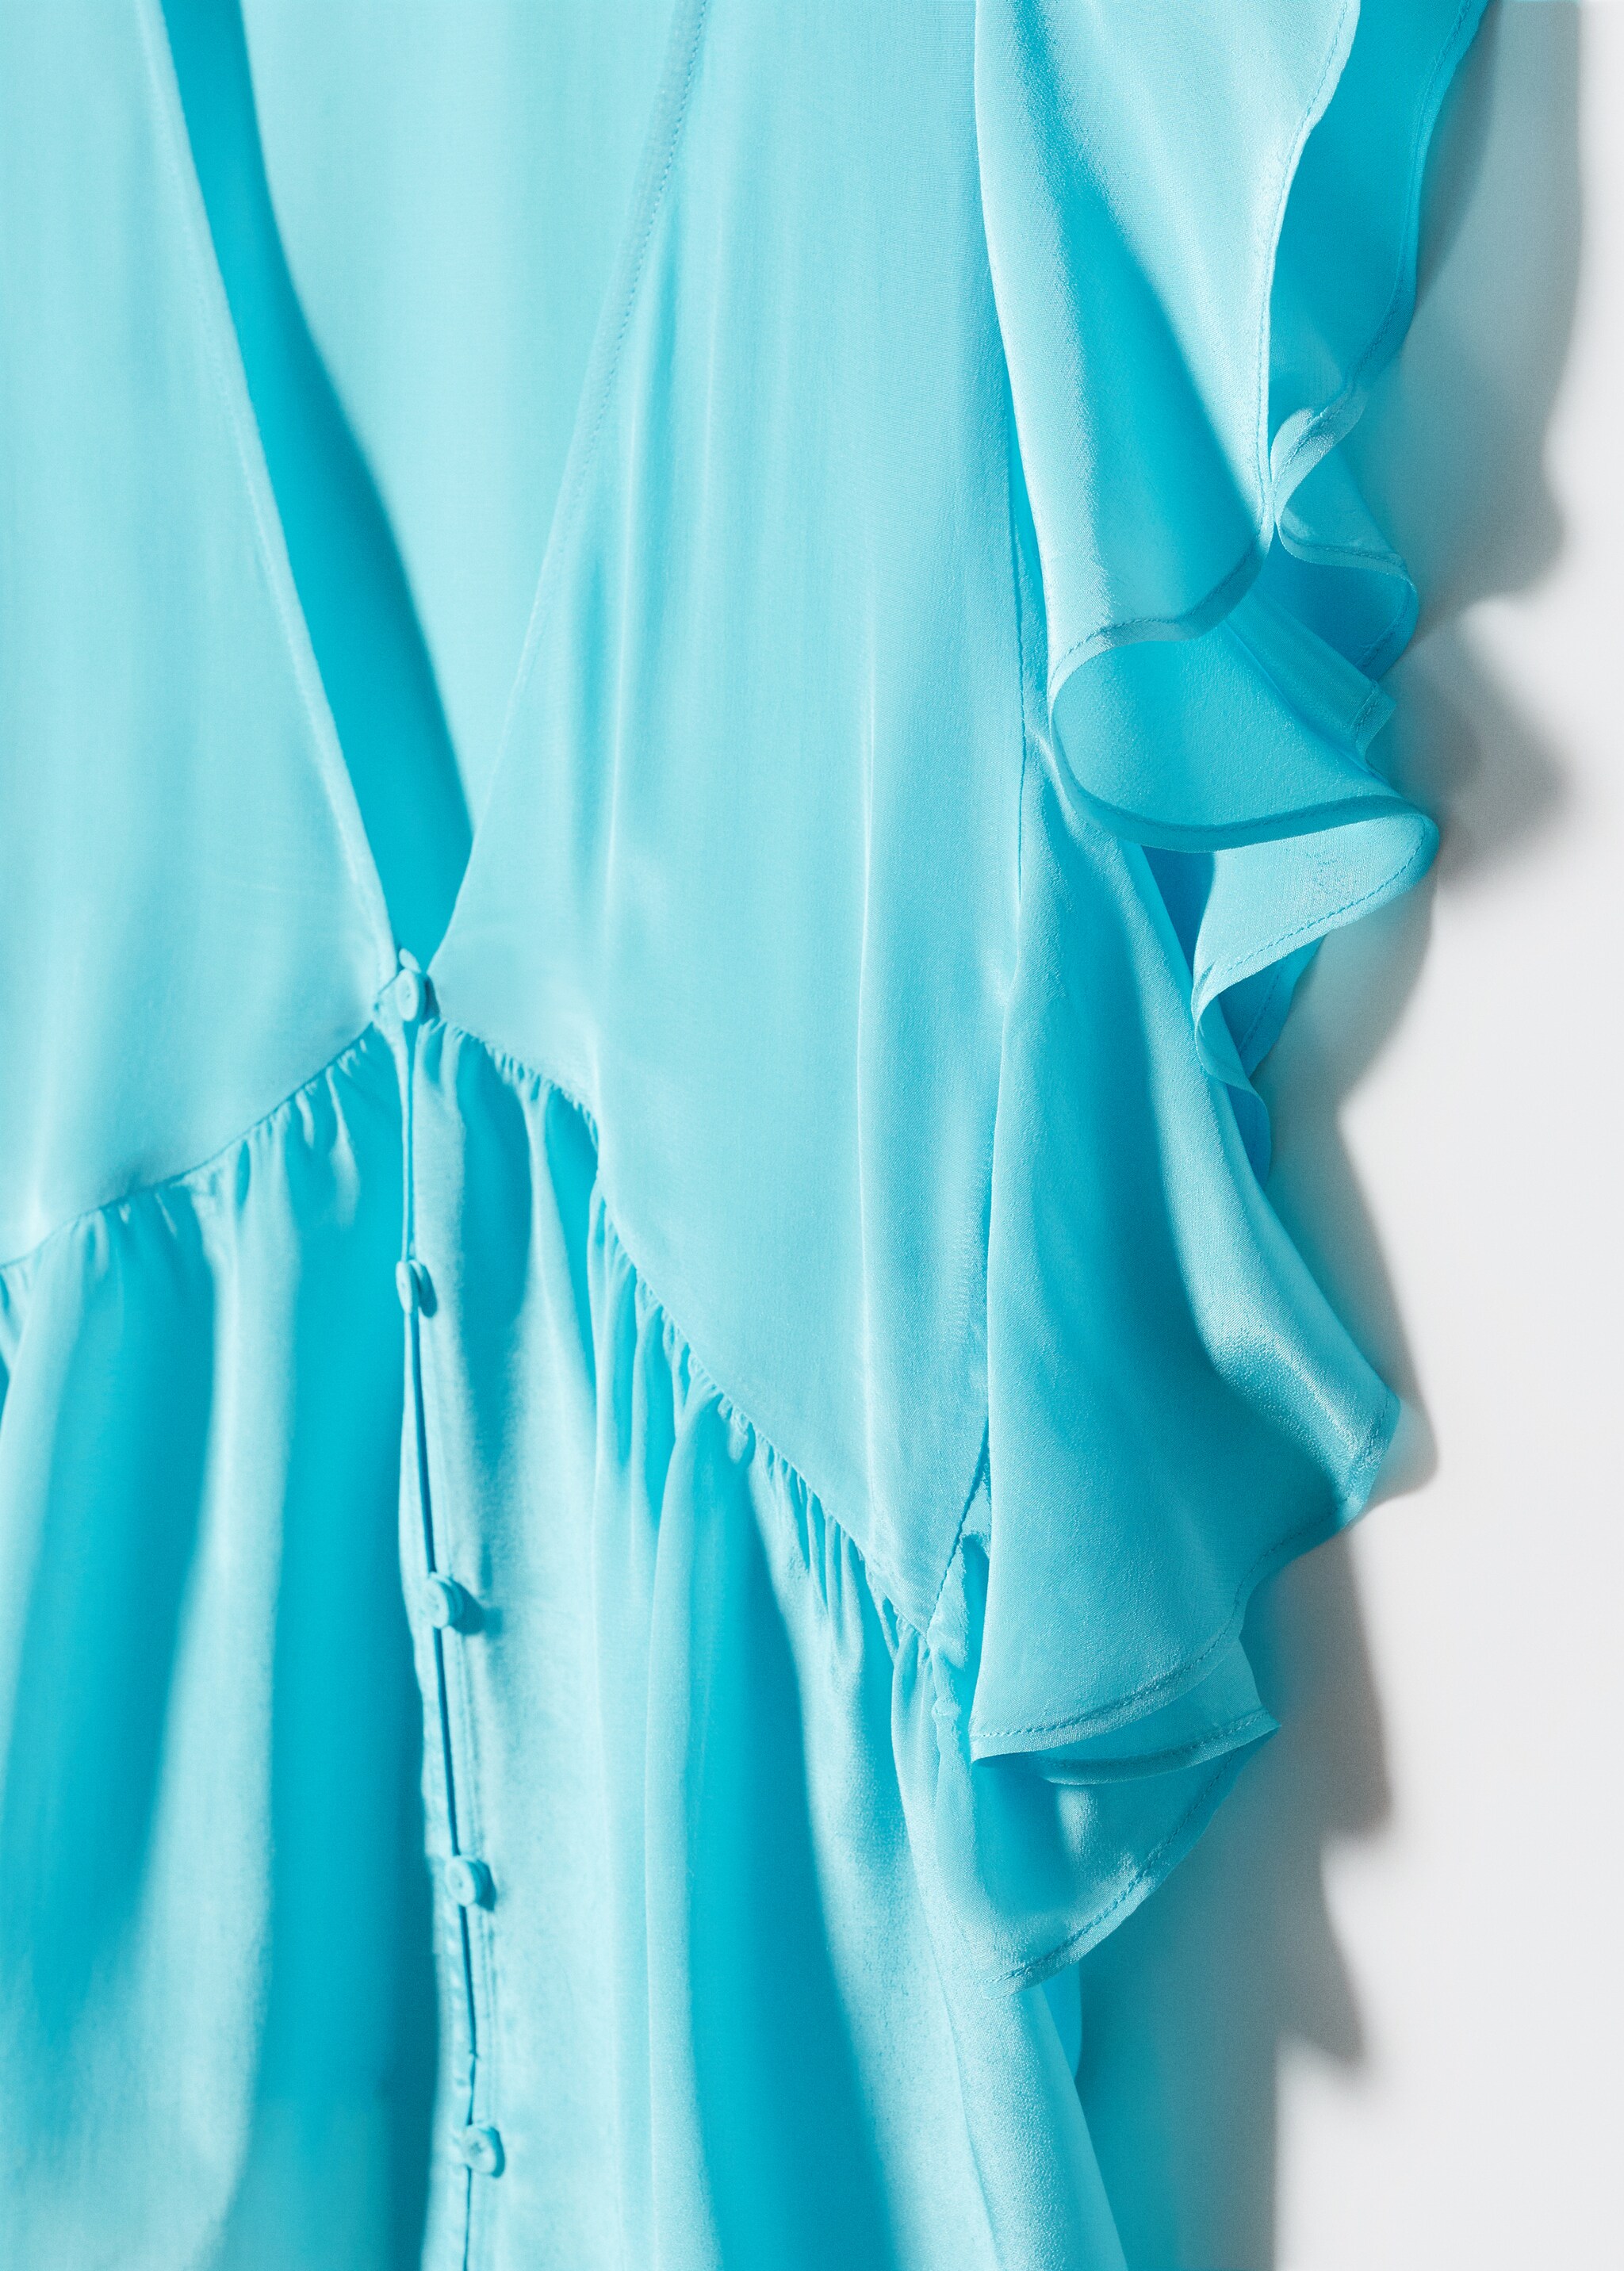 Ruffled blouse - Details of the article 8